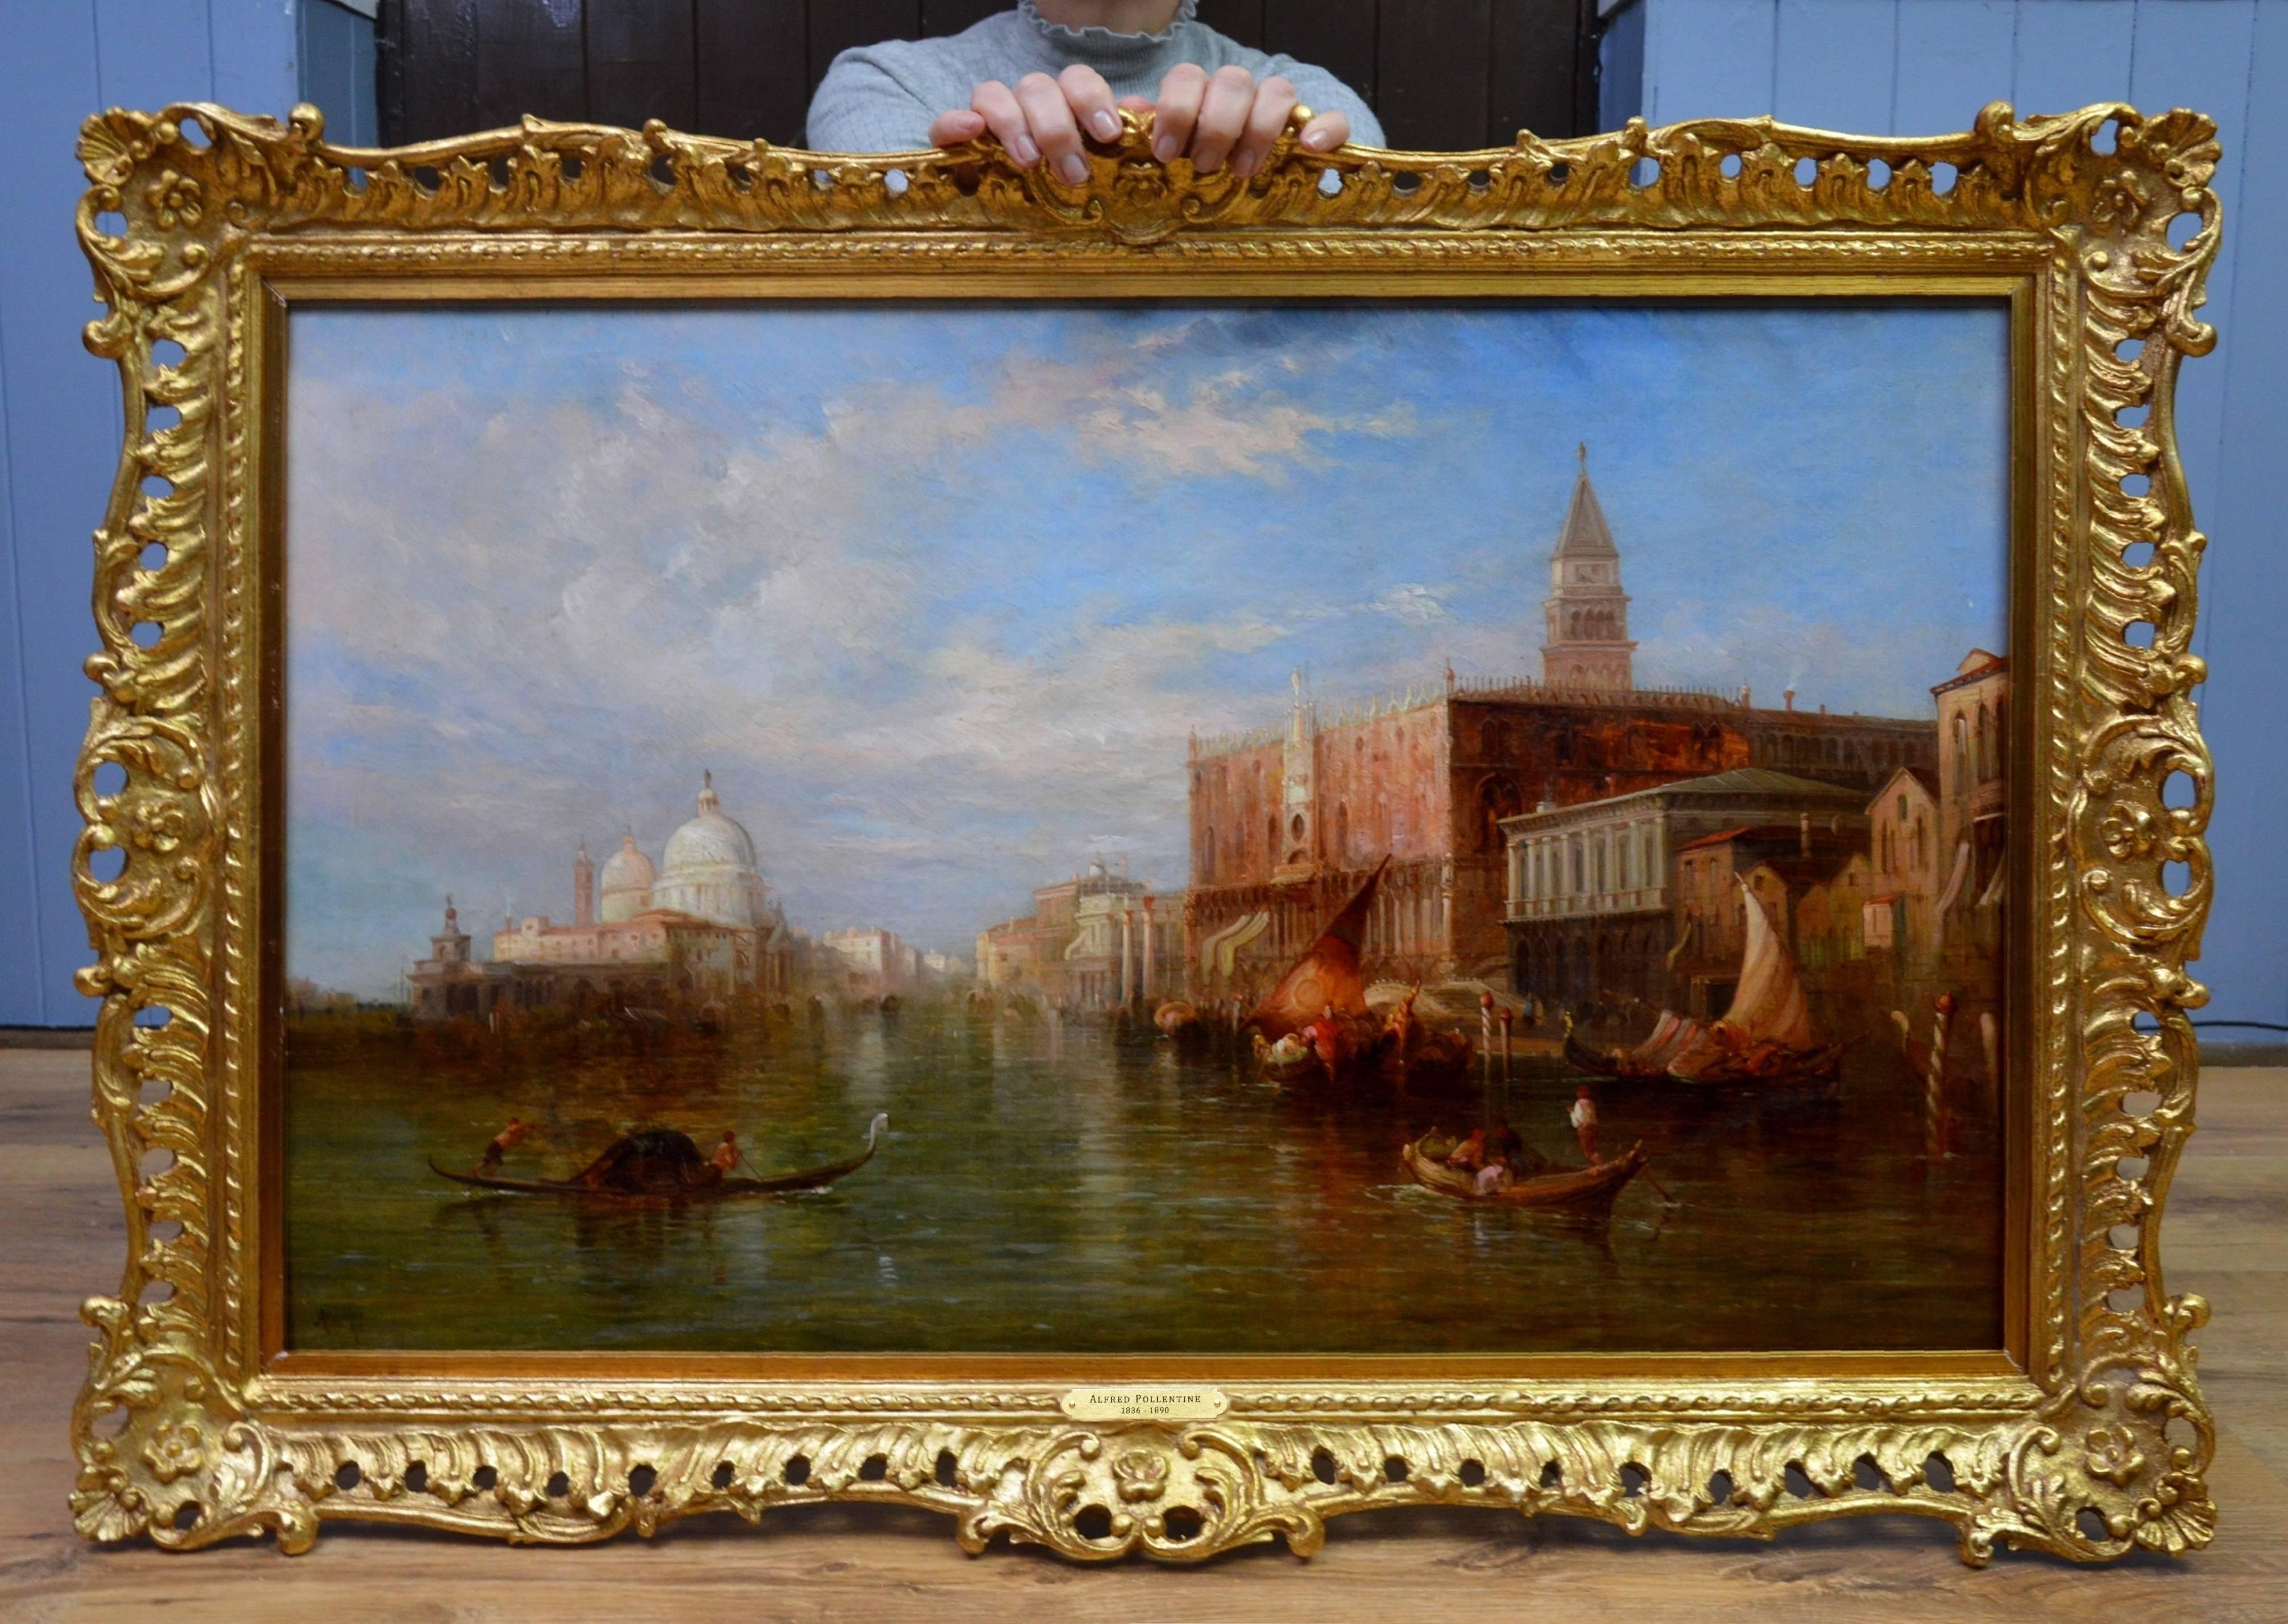 The Grand Canal - Venice - 19th Century Oil Painting - Alfred Pollentine 1